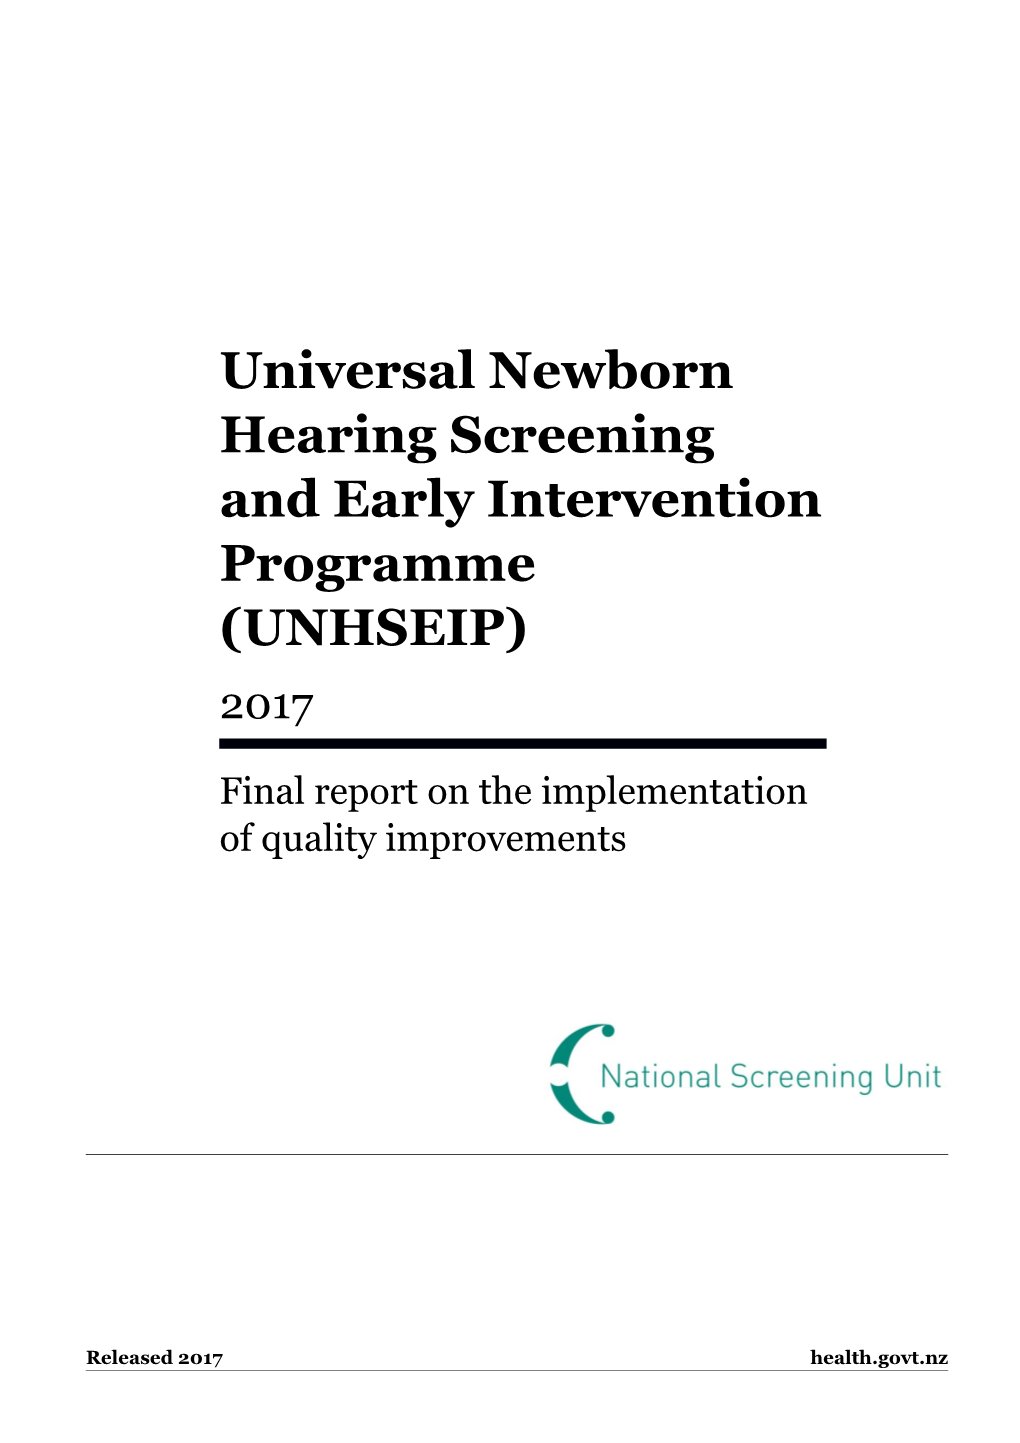 UNHSEIP Final Report on the Implementation of Quality Improvements